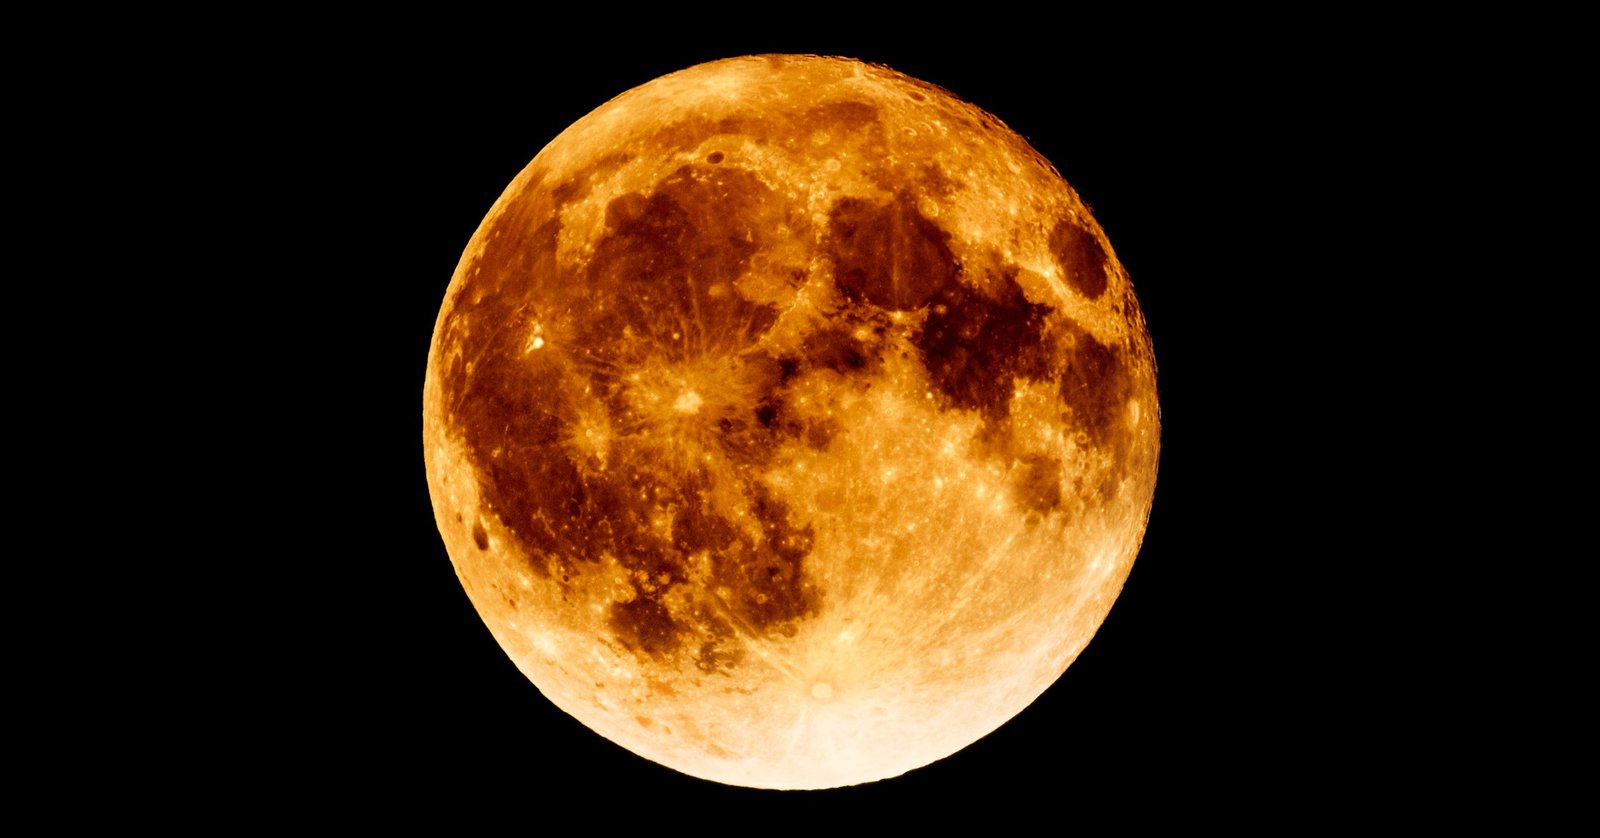 Delhi To Witness The 'Super Blue Blood Moon' Tonight!